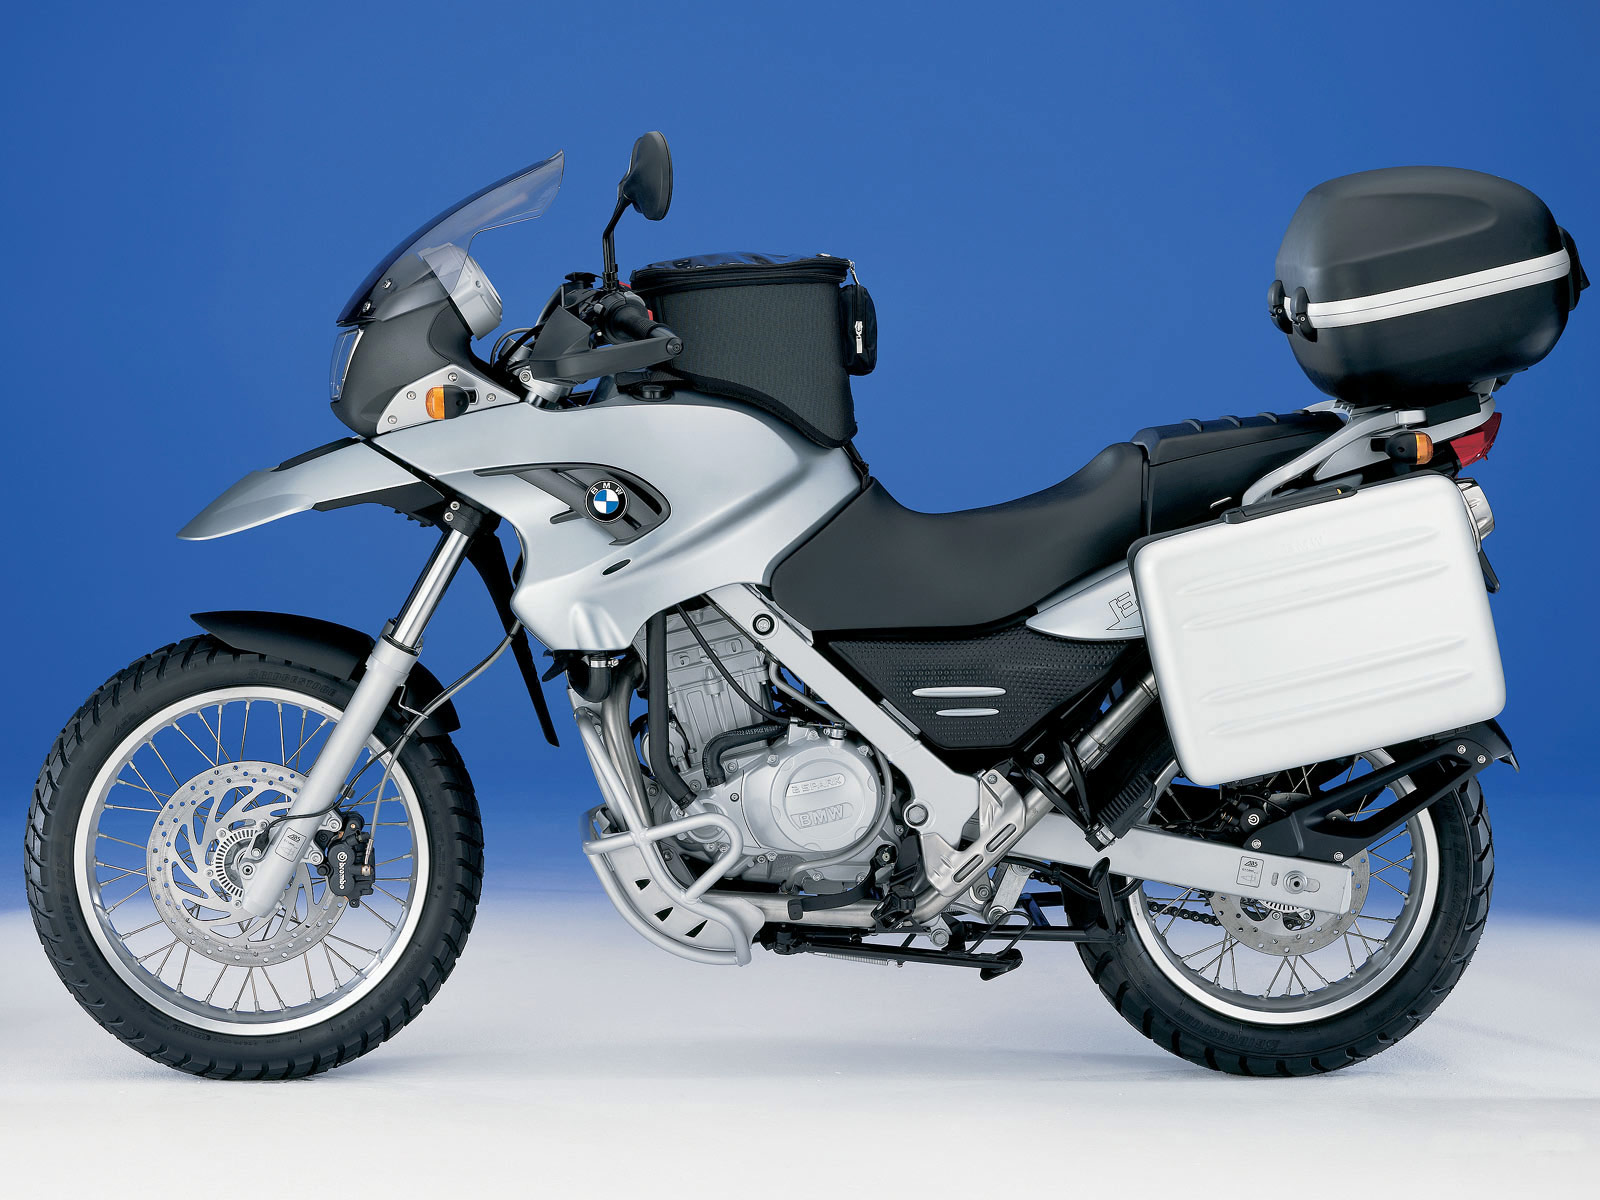 2004 BMW F 650 GS motorcycle wallpaper. Accident lawyers info